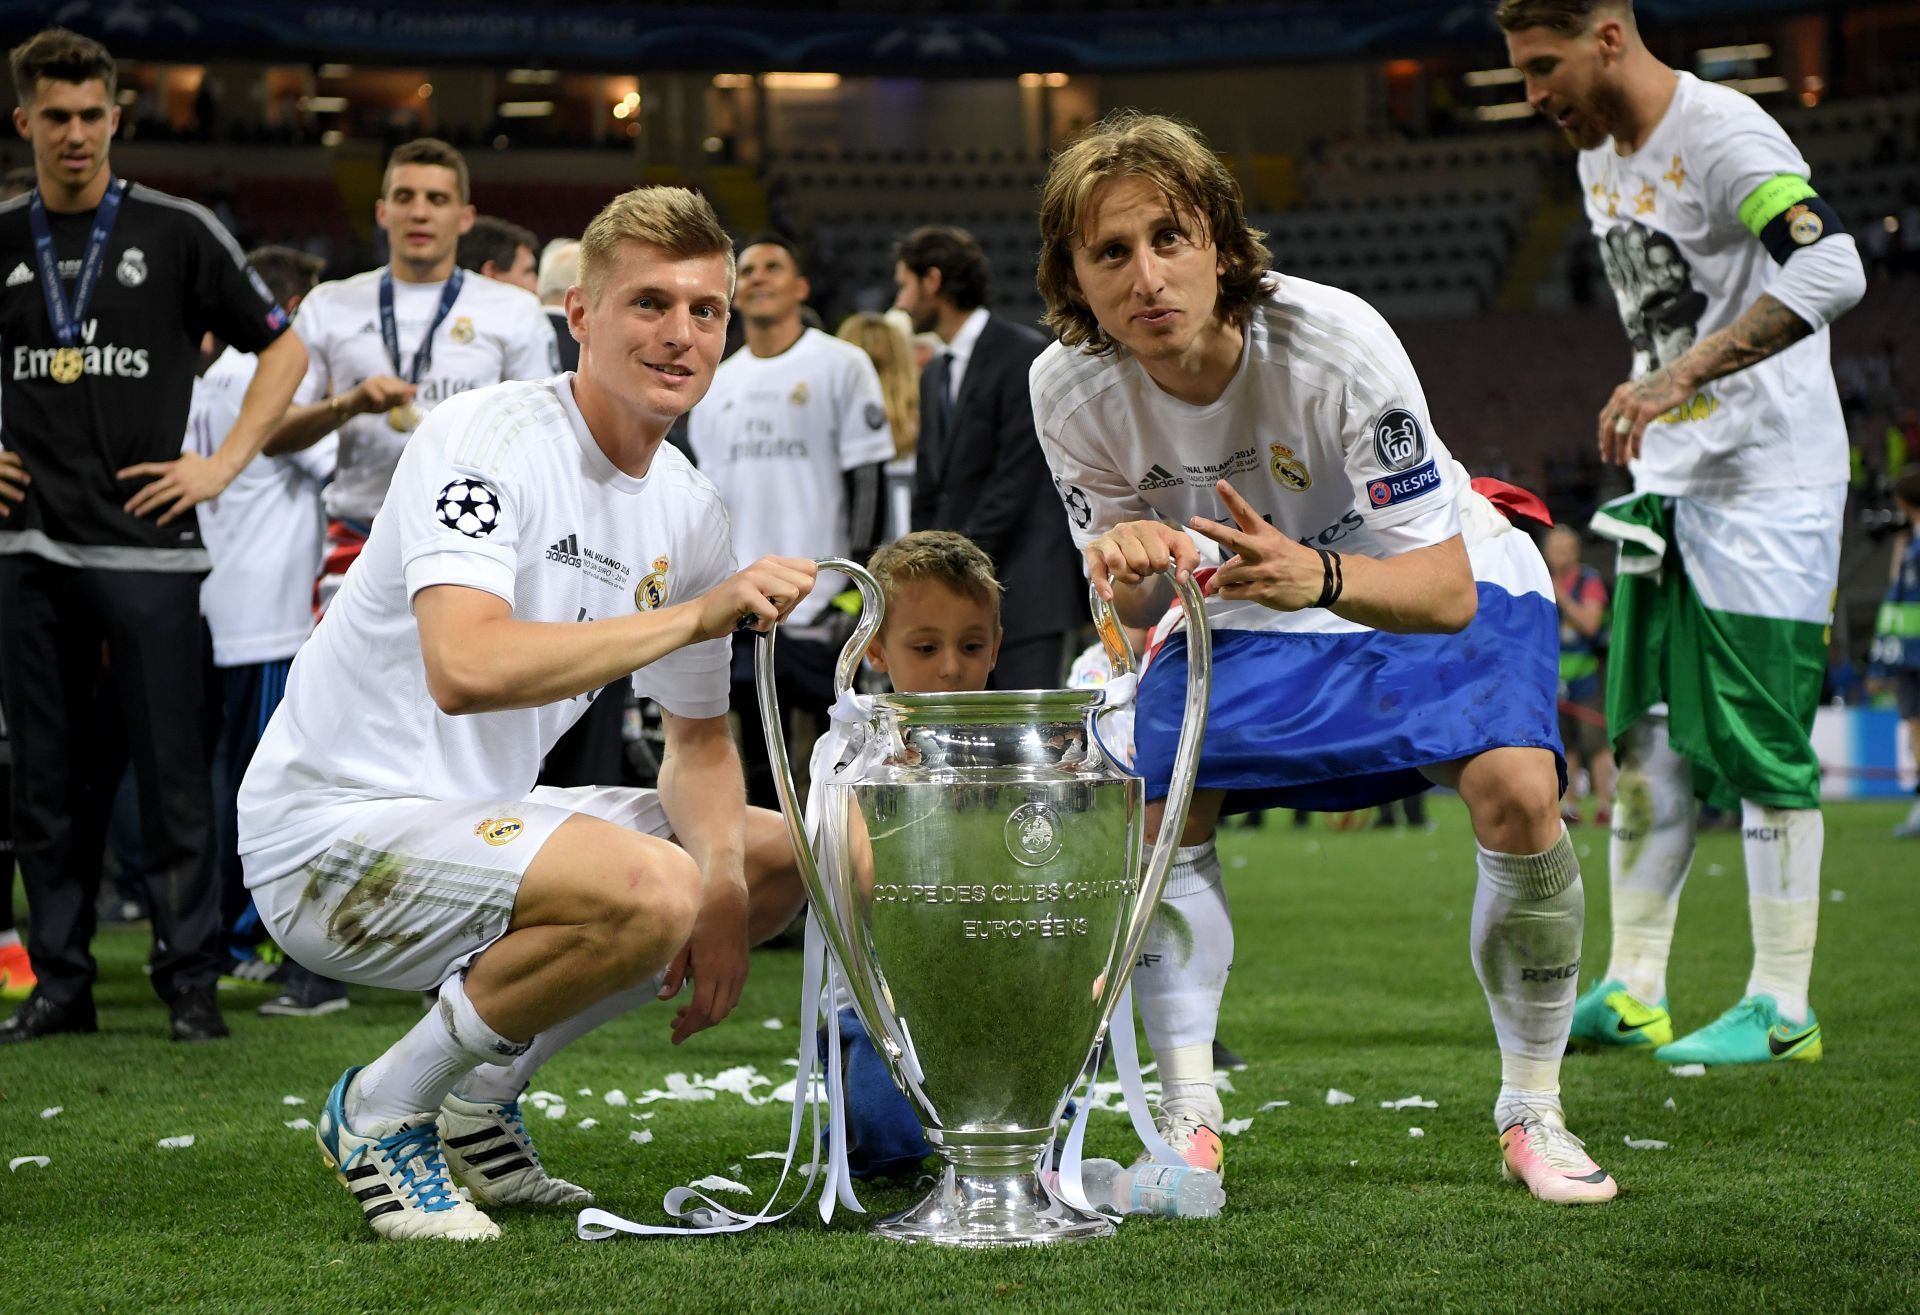 Real Madrid boast arguably the best midfield duo in the world, Kroos (L) and Modric (R).